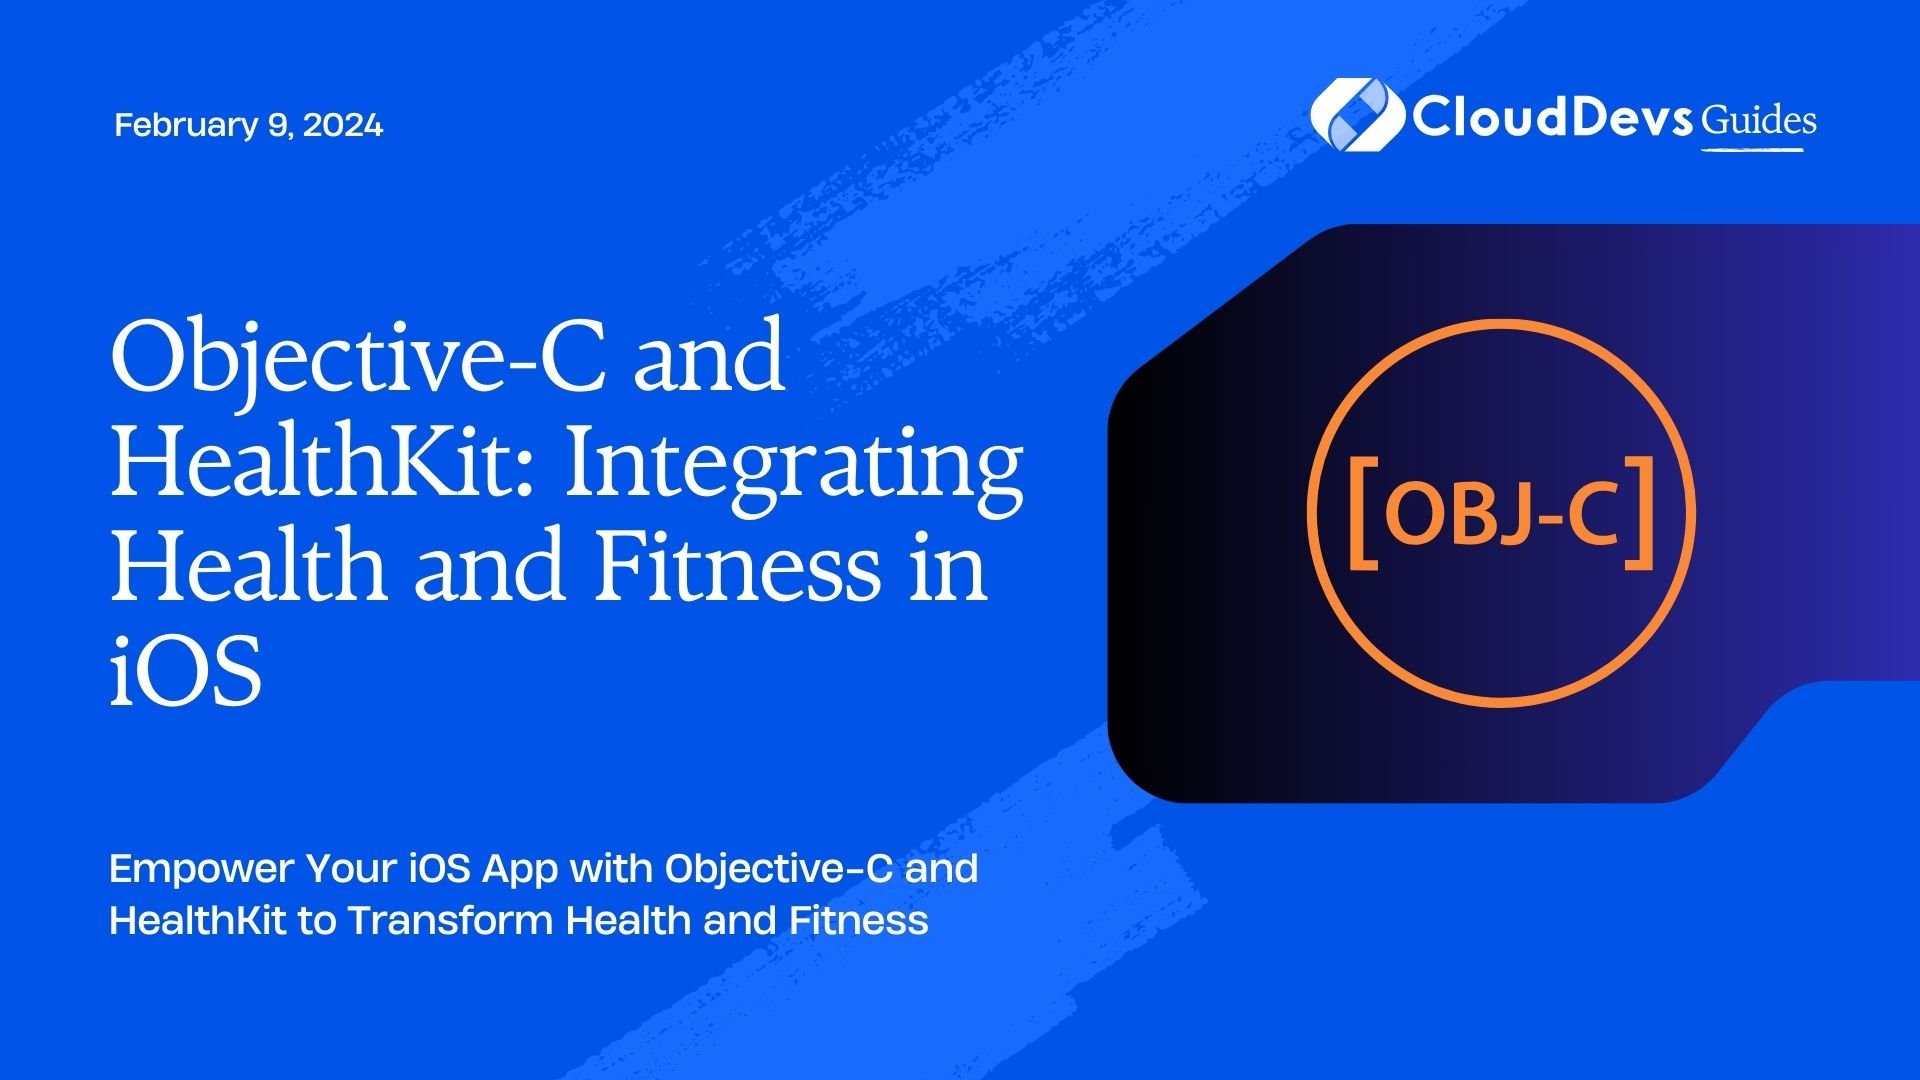 Objective-C and HealthKit: Integrating Health and Fitness in iOS